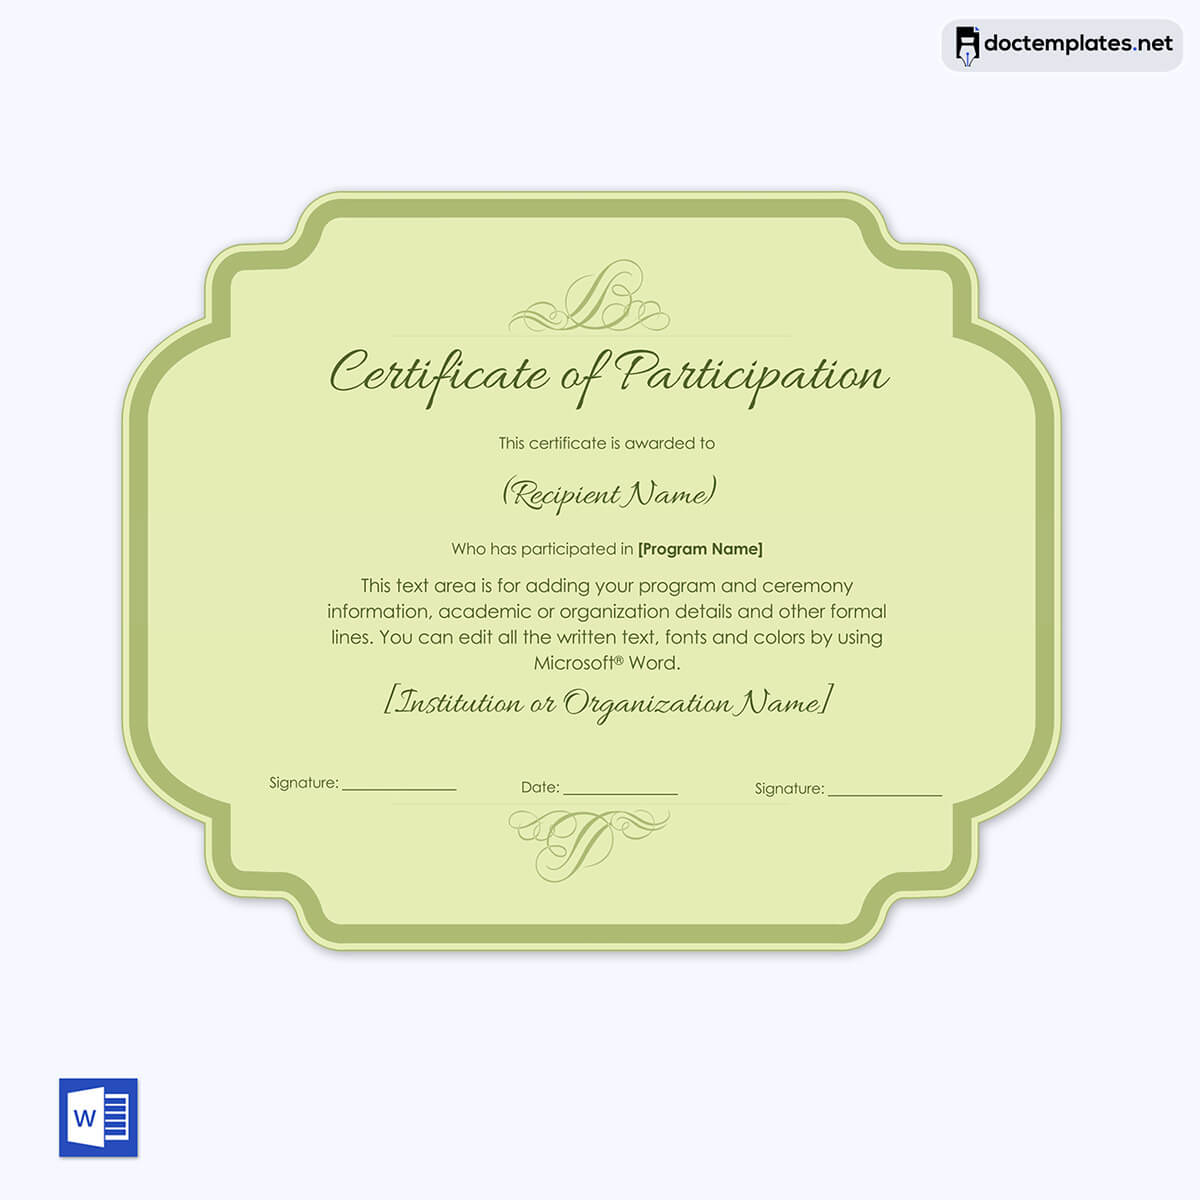 
participation certificate template free download